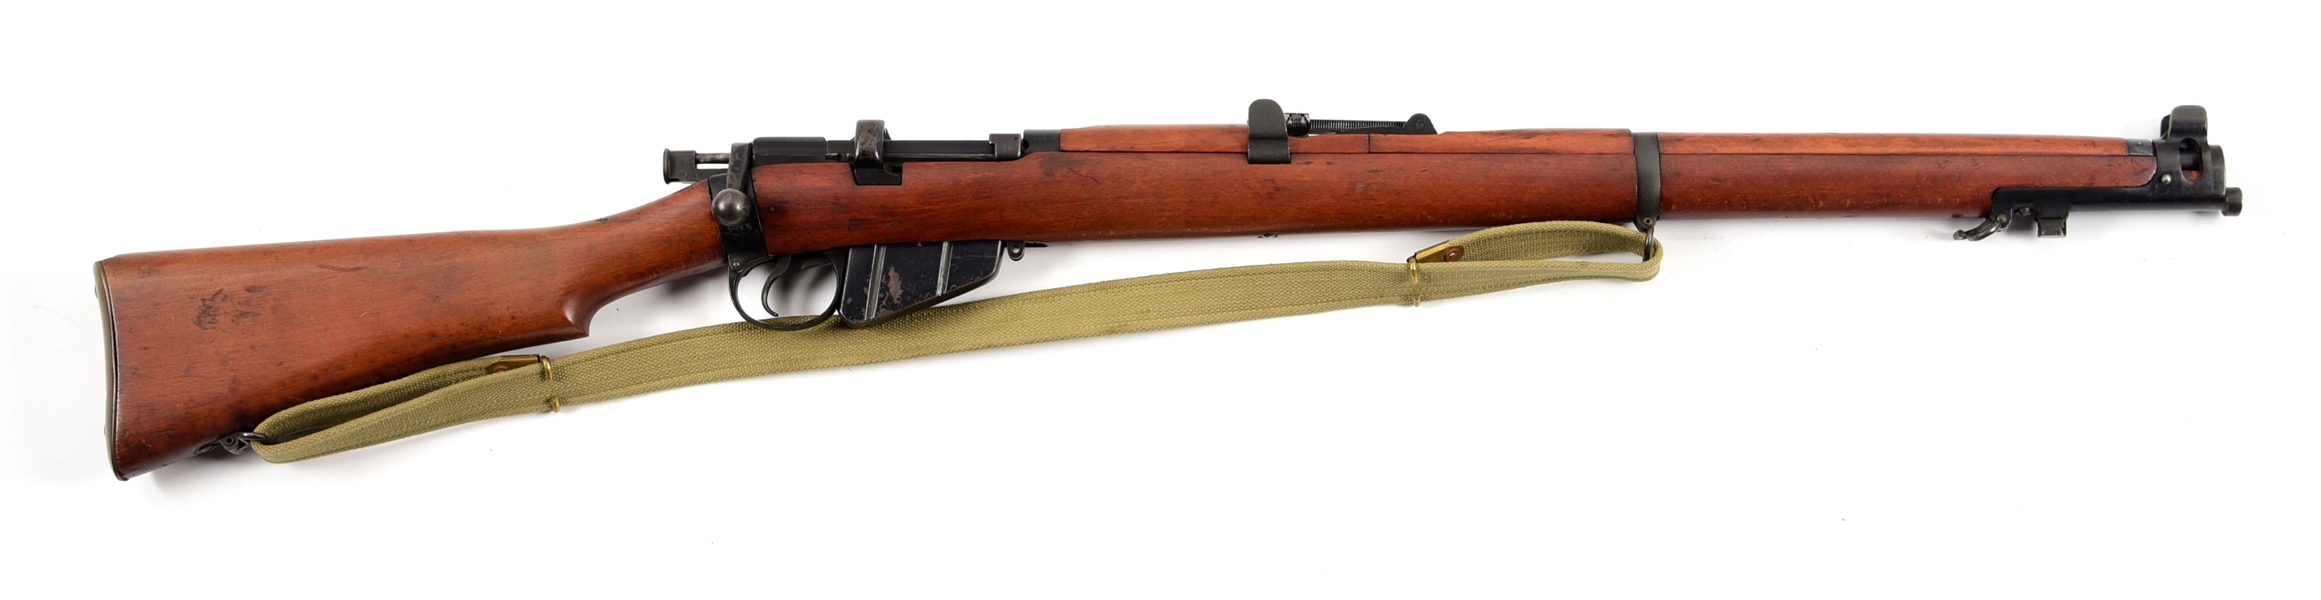 (C) ENFIELD SMLE III BOLT ACTION RIFLE.